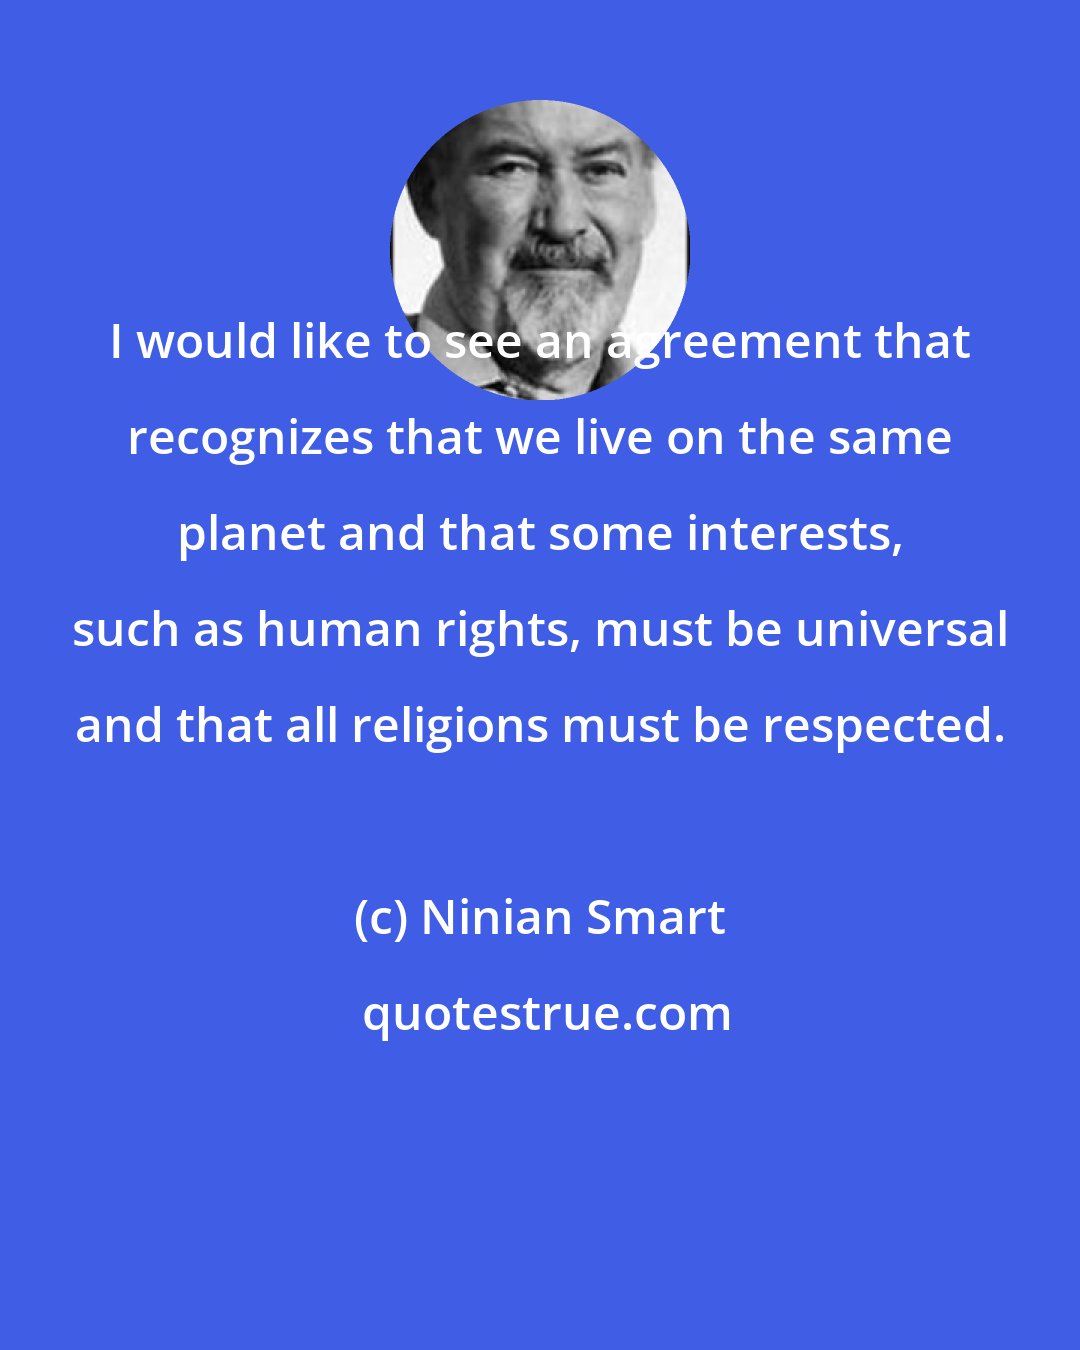 Ninian Smart: I would like to see an agreement that recognizes that we live on the same planet and that some interests, such as human rights, must be universal and that all religions must be respected.